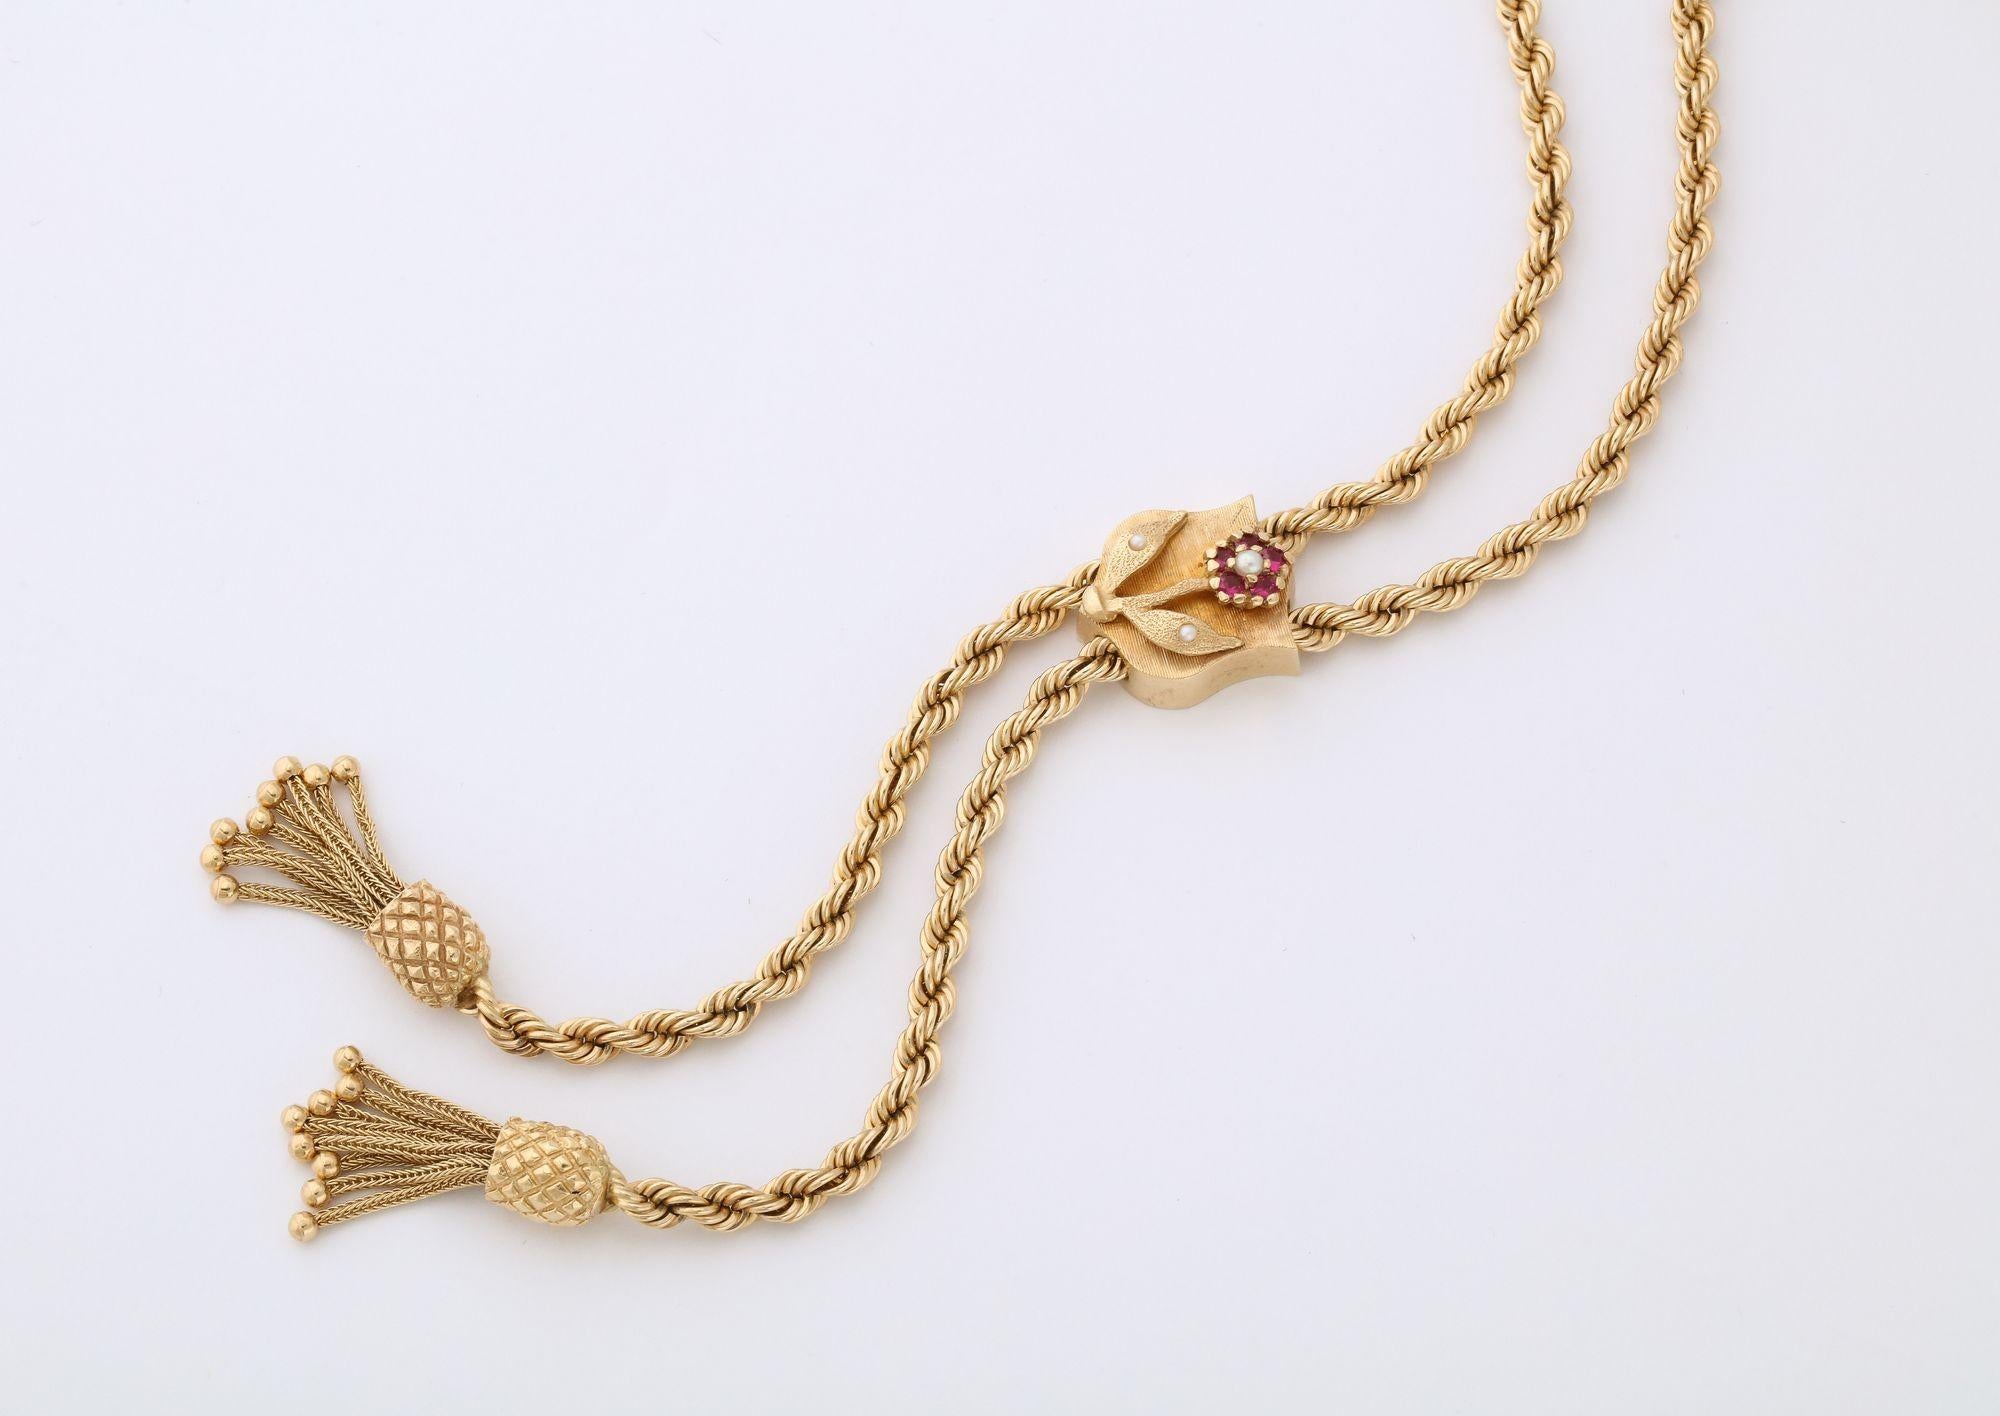 Women's Retro Gold Lariat on Rope Twist Chain with Tassels and a Ruby and Pearl Flower For Sale